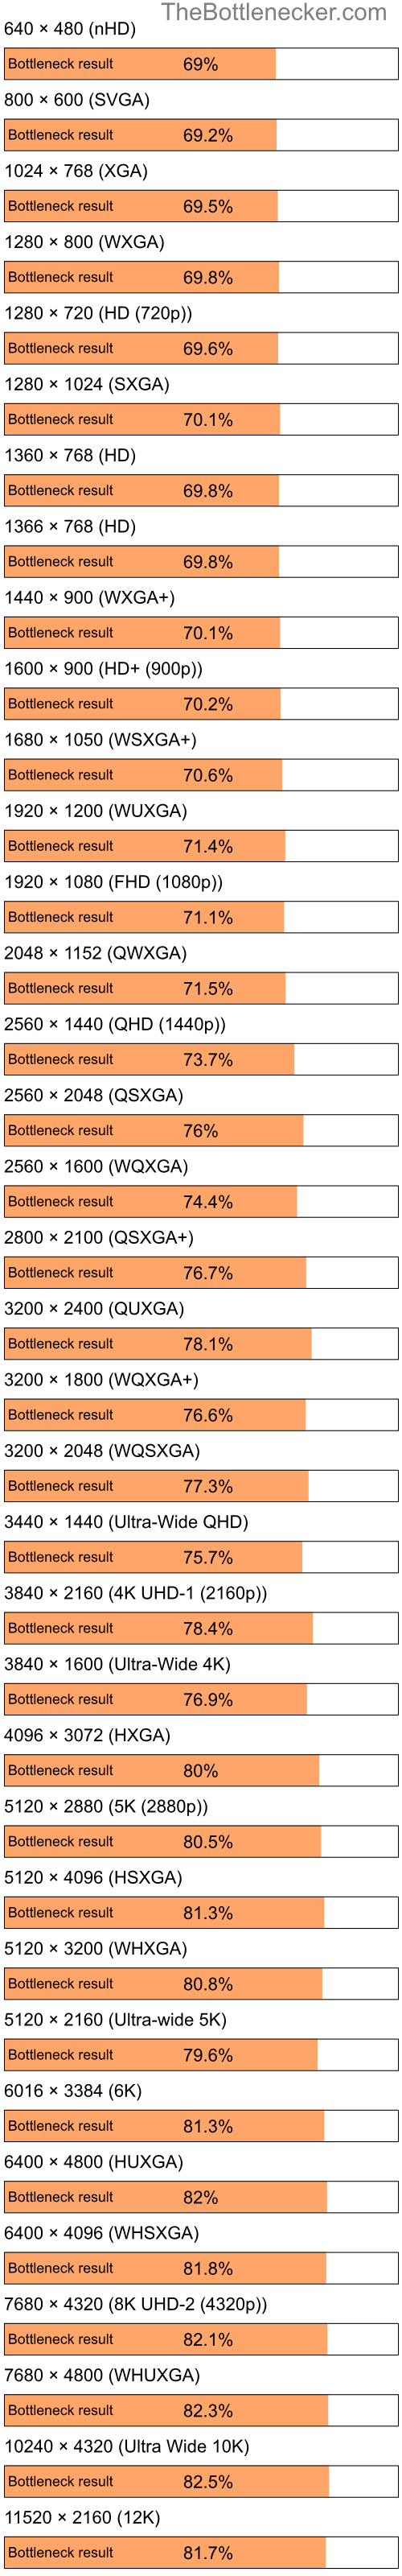 Bottleneck results by resolution for Intel Pentium 4 and AMD Radeon 9500 9700 in Processor Intense Tasks